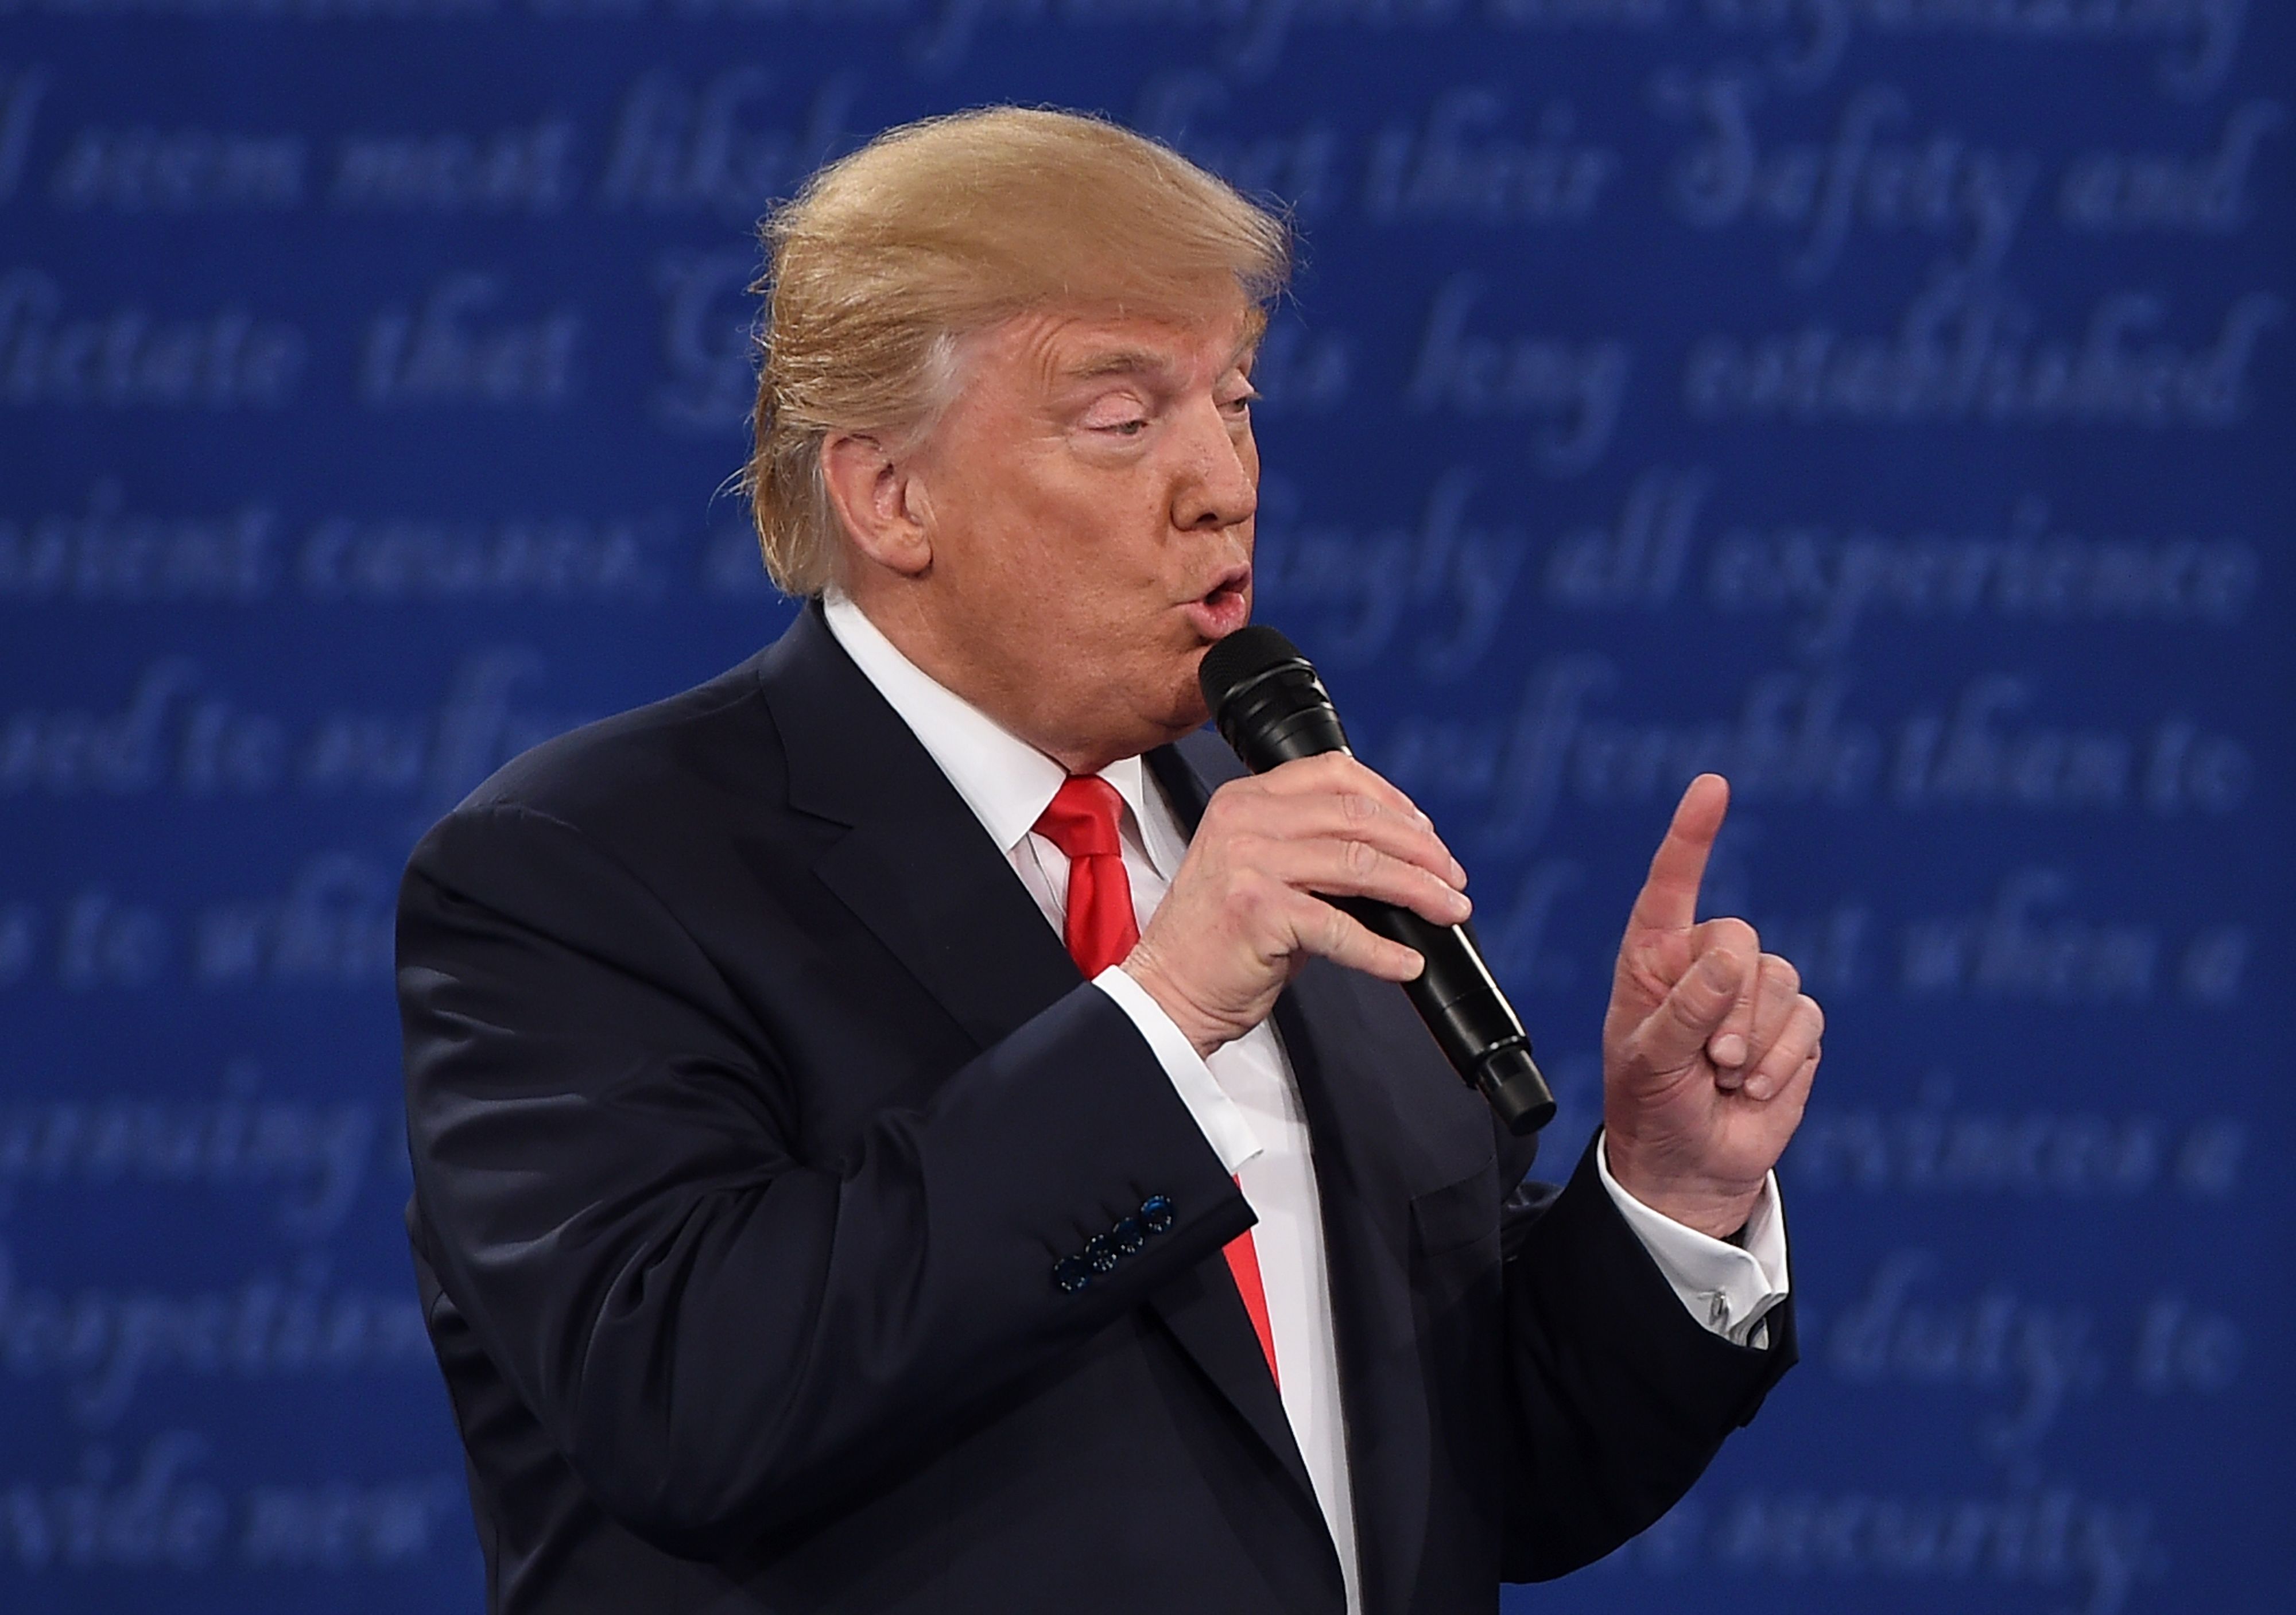 Republican presidential candidate Donald Trump speaks during the second presidential debate at Washington University in St. Louis on Oct. 9, 2016 (Robyn Beck—AFP/Getty Images)